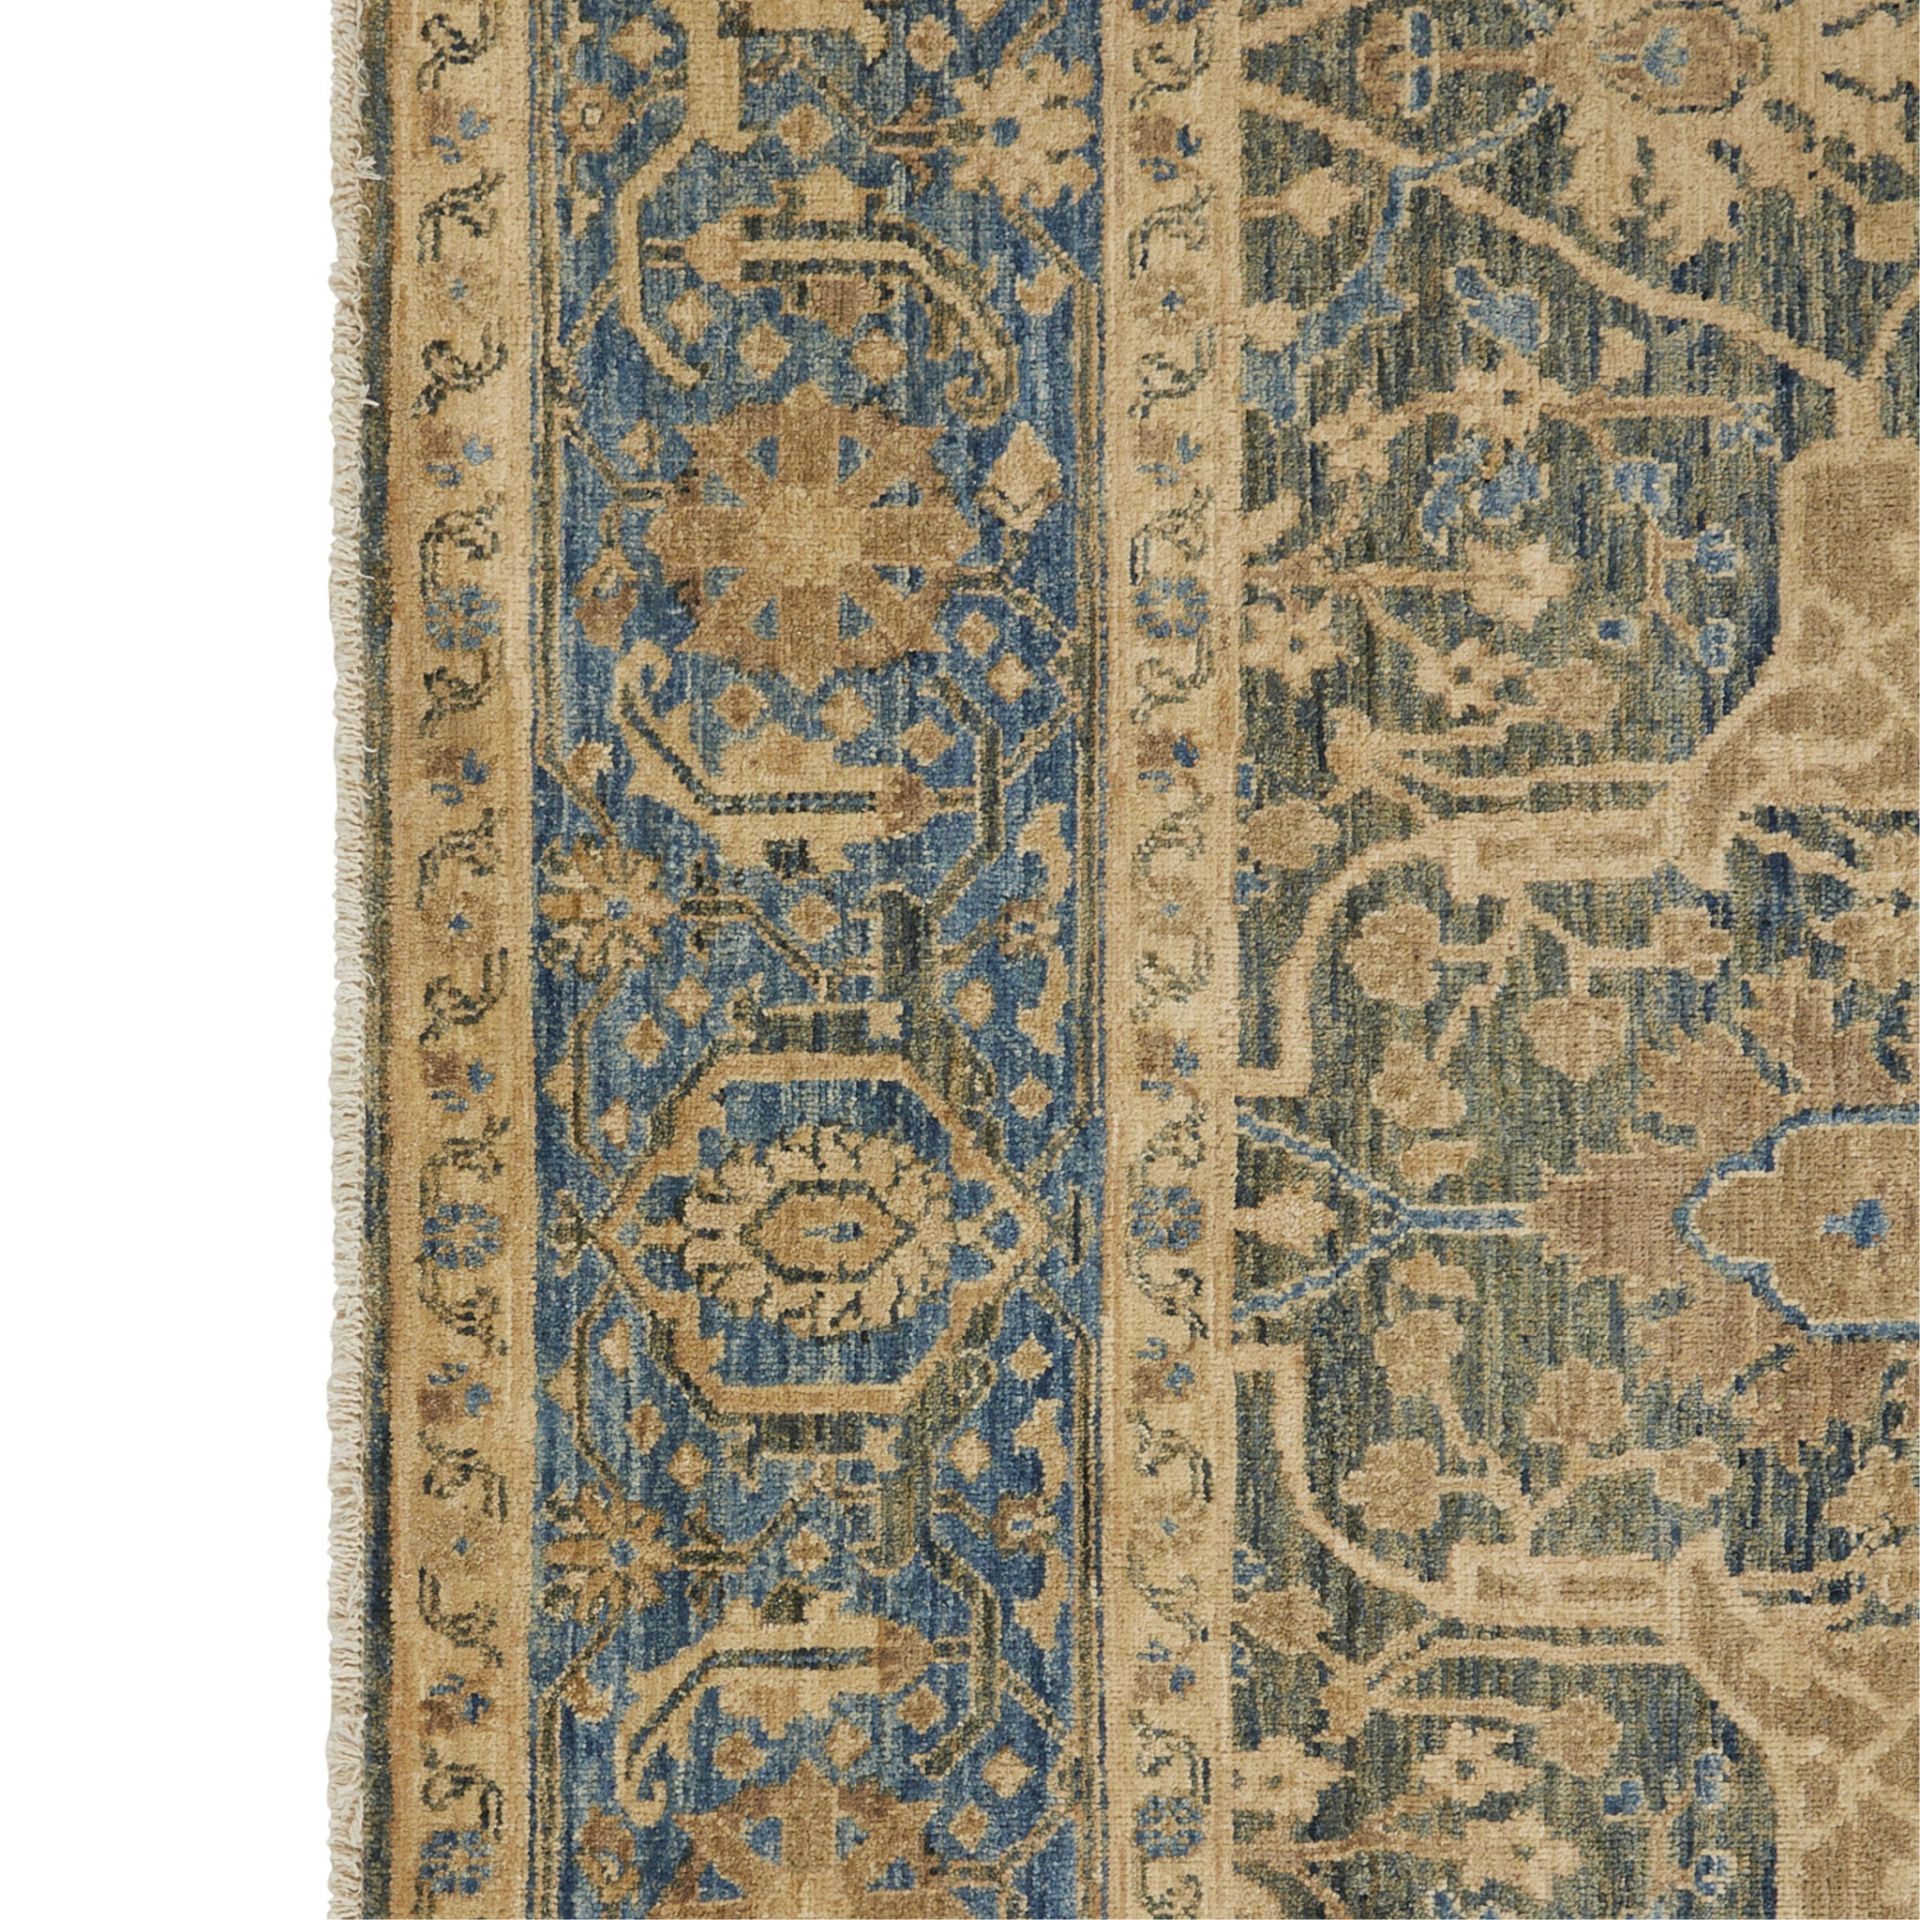 Large Persian Blue & White Floral Rug 10' x 8' - Image 6 of 6